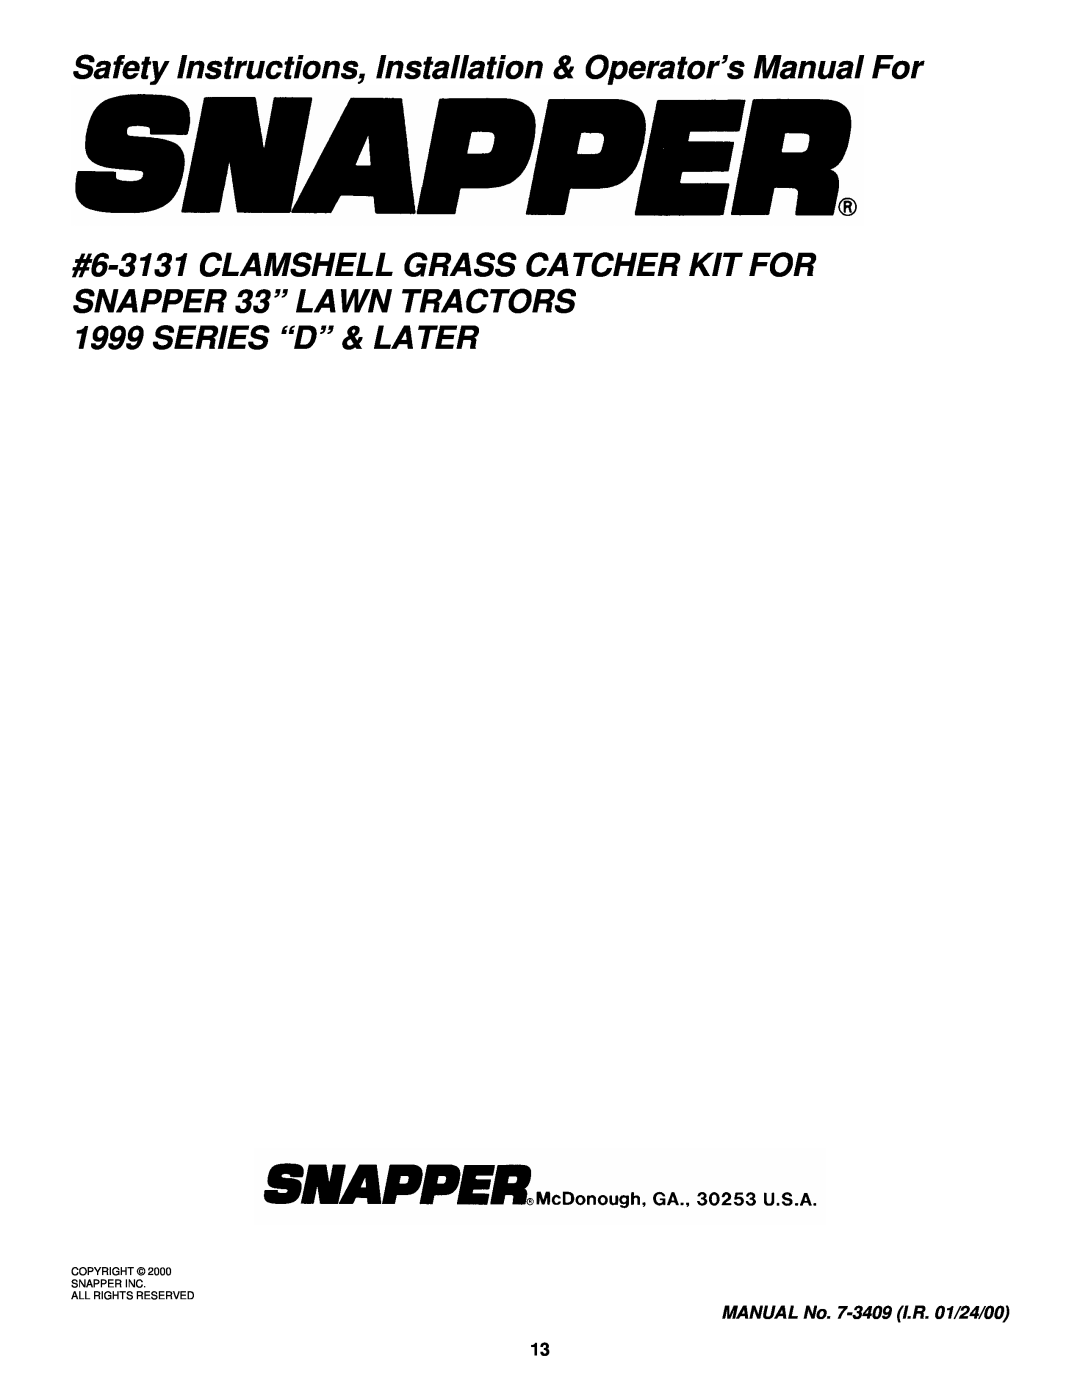 Snapper manual #6-3131 CLAMSHELL GRASS CATCHER KIT FOR SNAPPER 33” LAWN TRACTORS, Series “D” & Later 